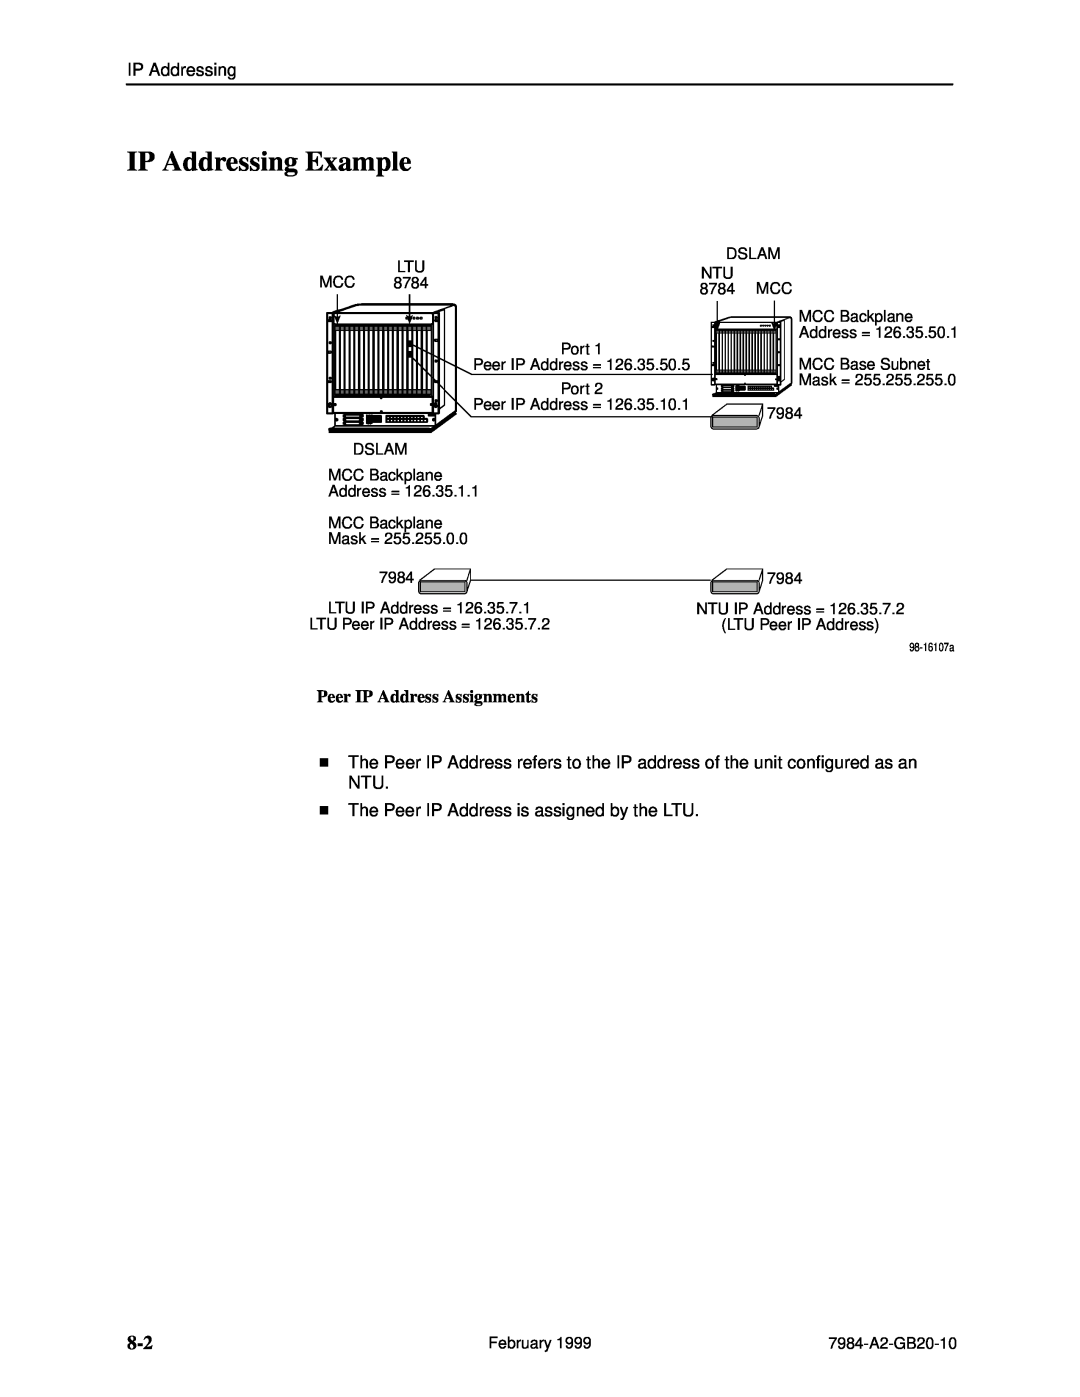 Paradyne Hotwire 7984 manual IP Addressing Example, Peer IP Address Assignments 